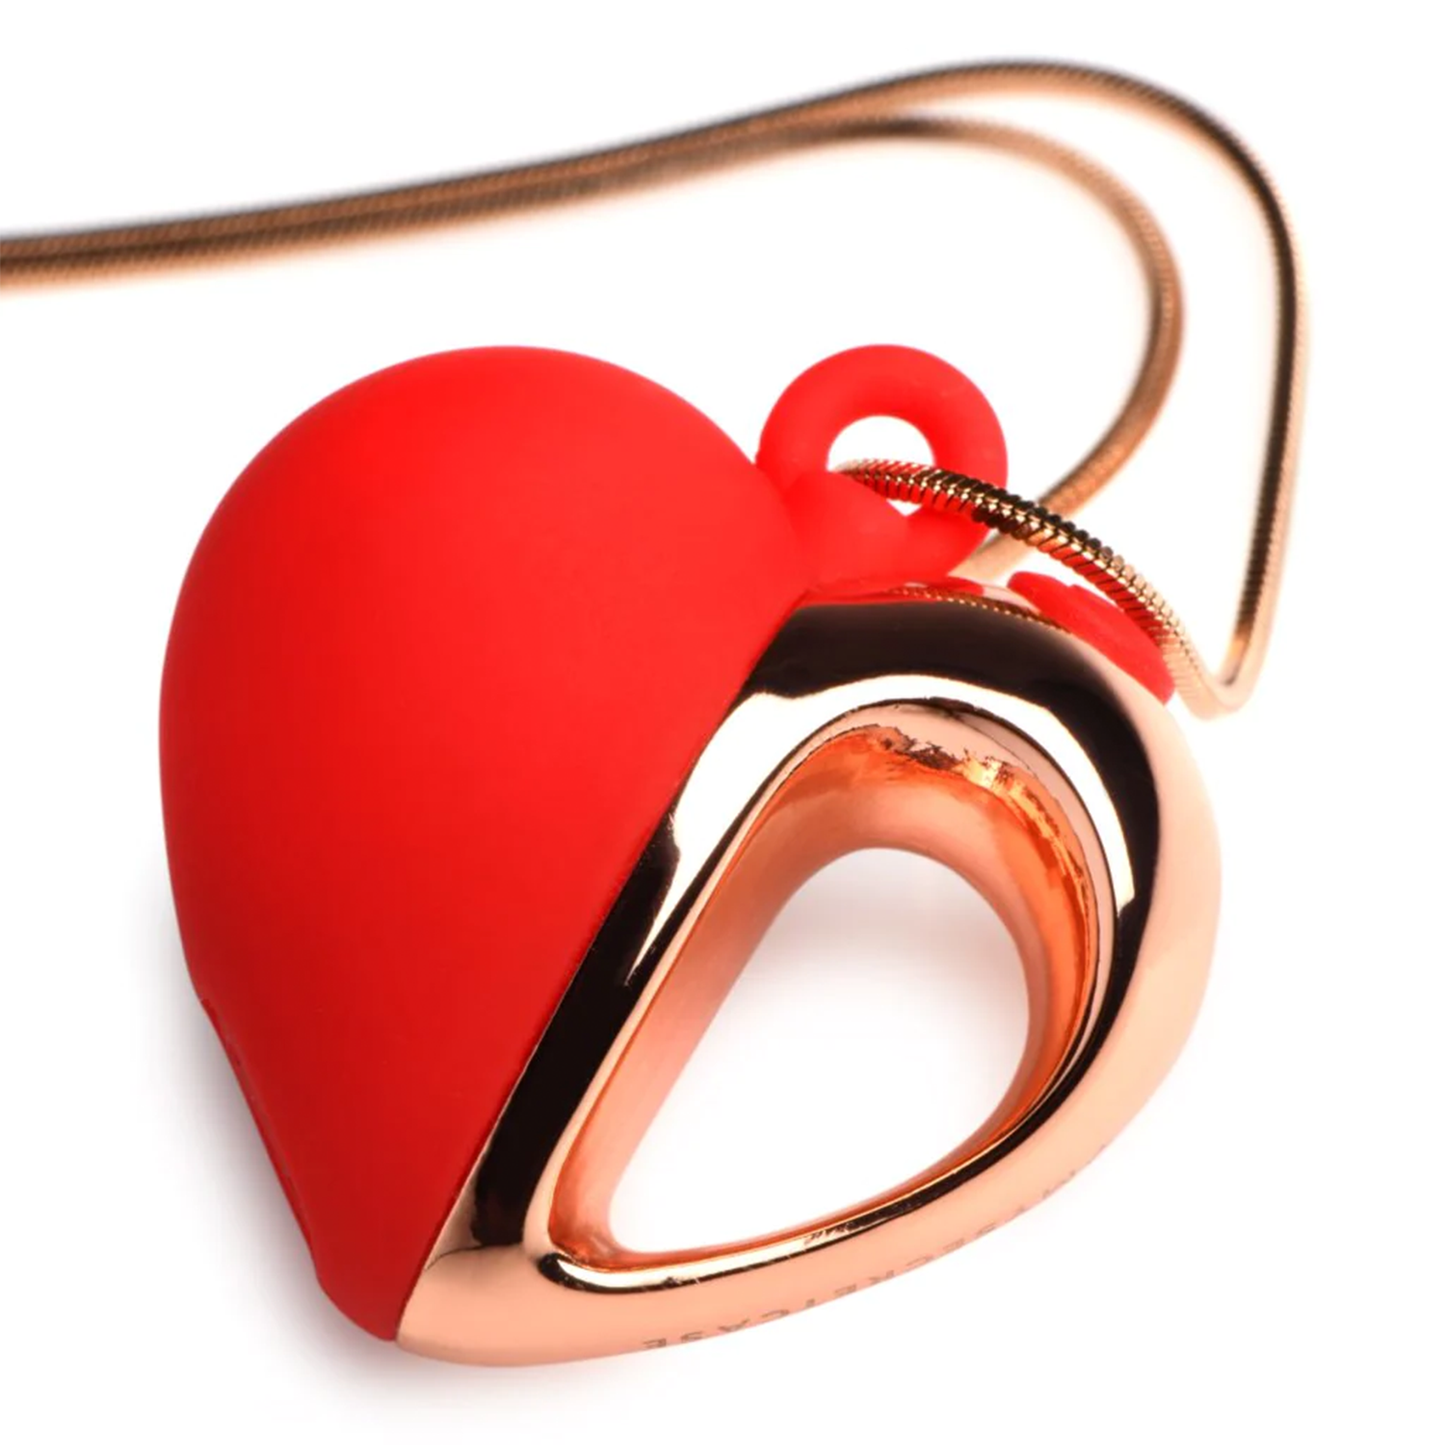 Heart Shaped Vibrating Necklace